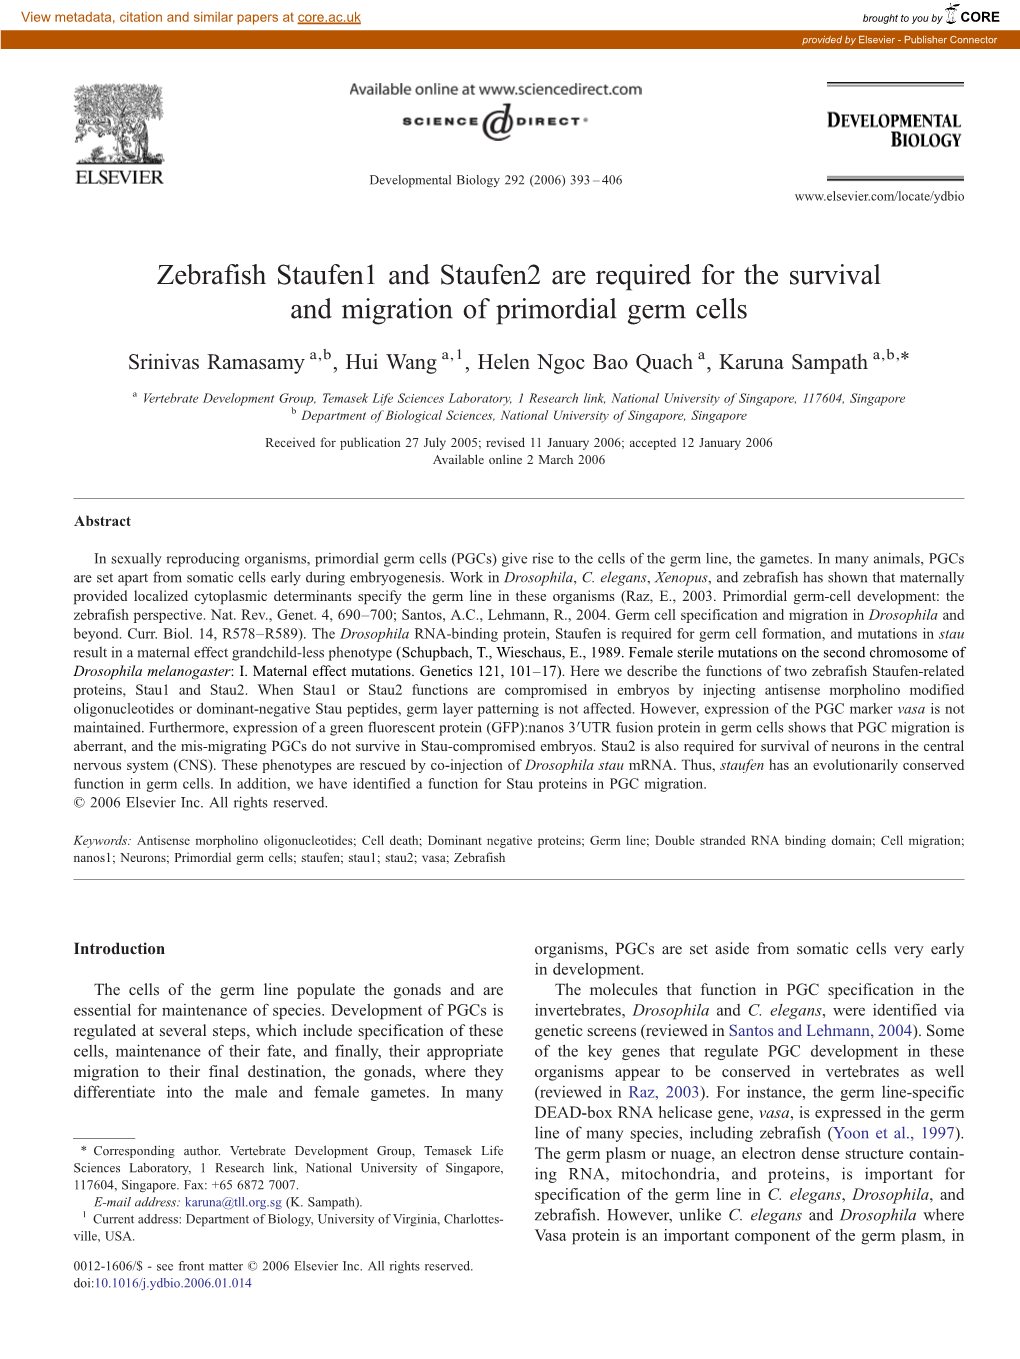 Zebrafish Staufen1 and Staufen2 Are Required for the Survival And